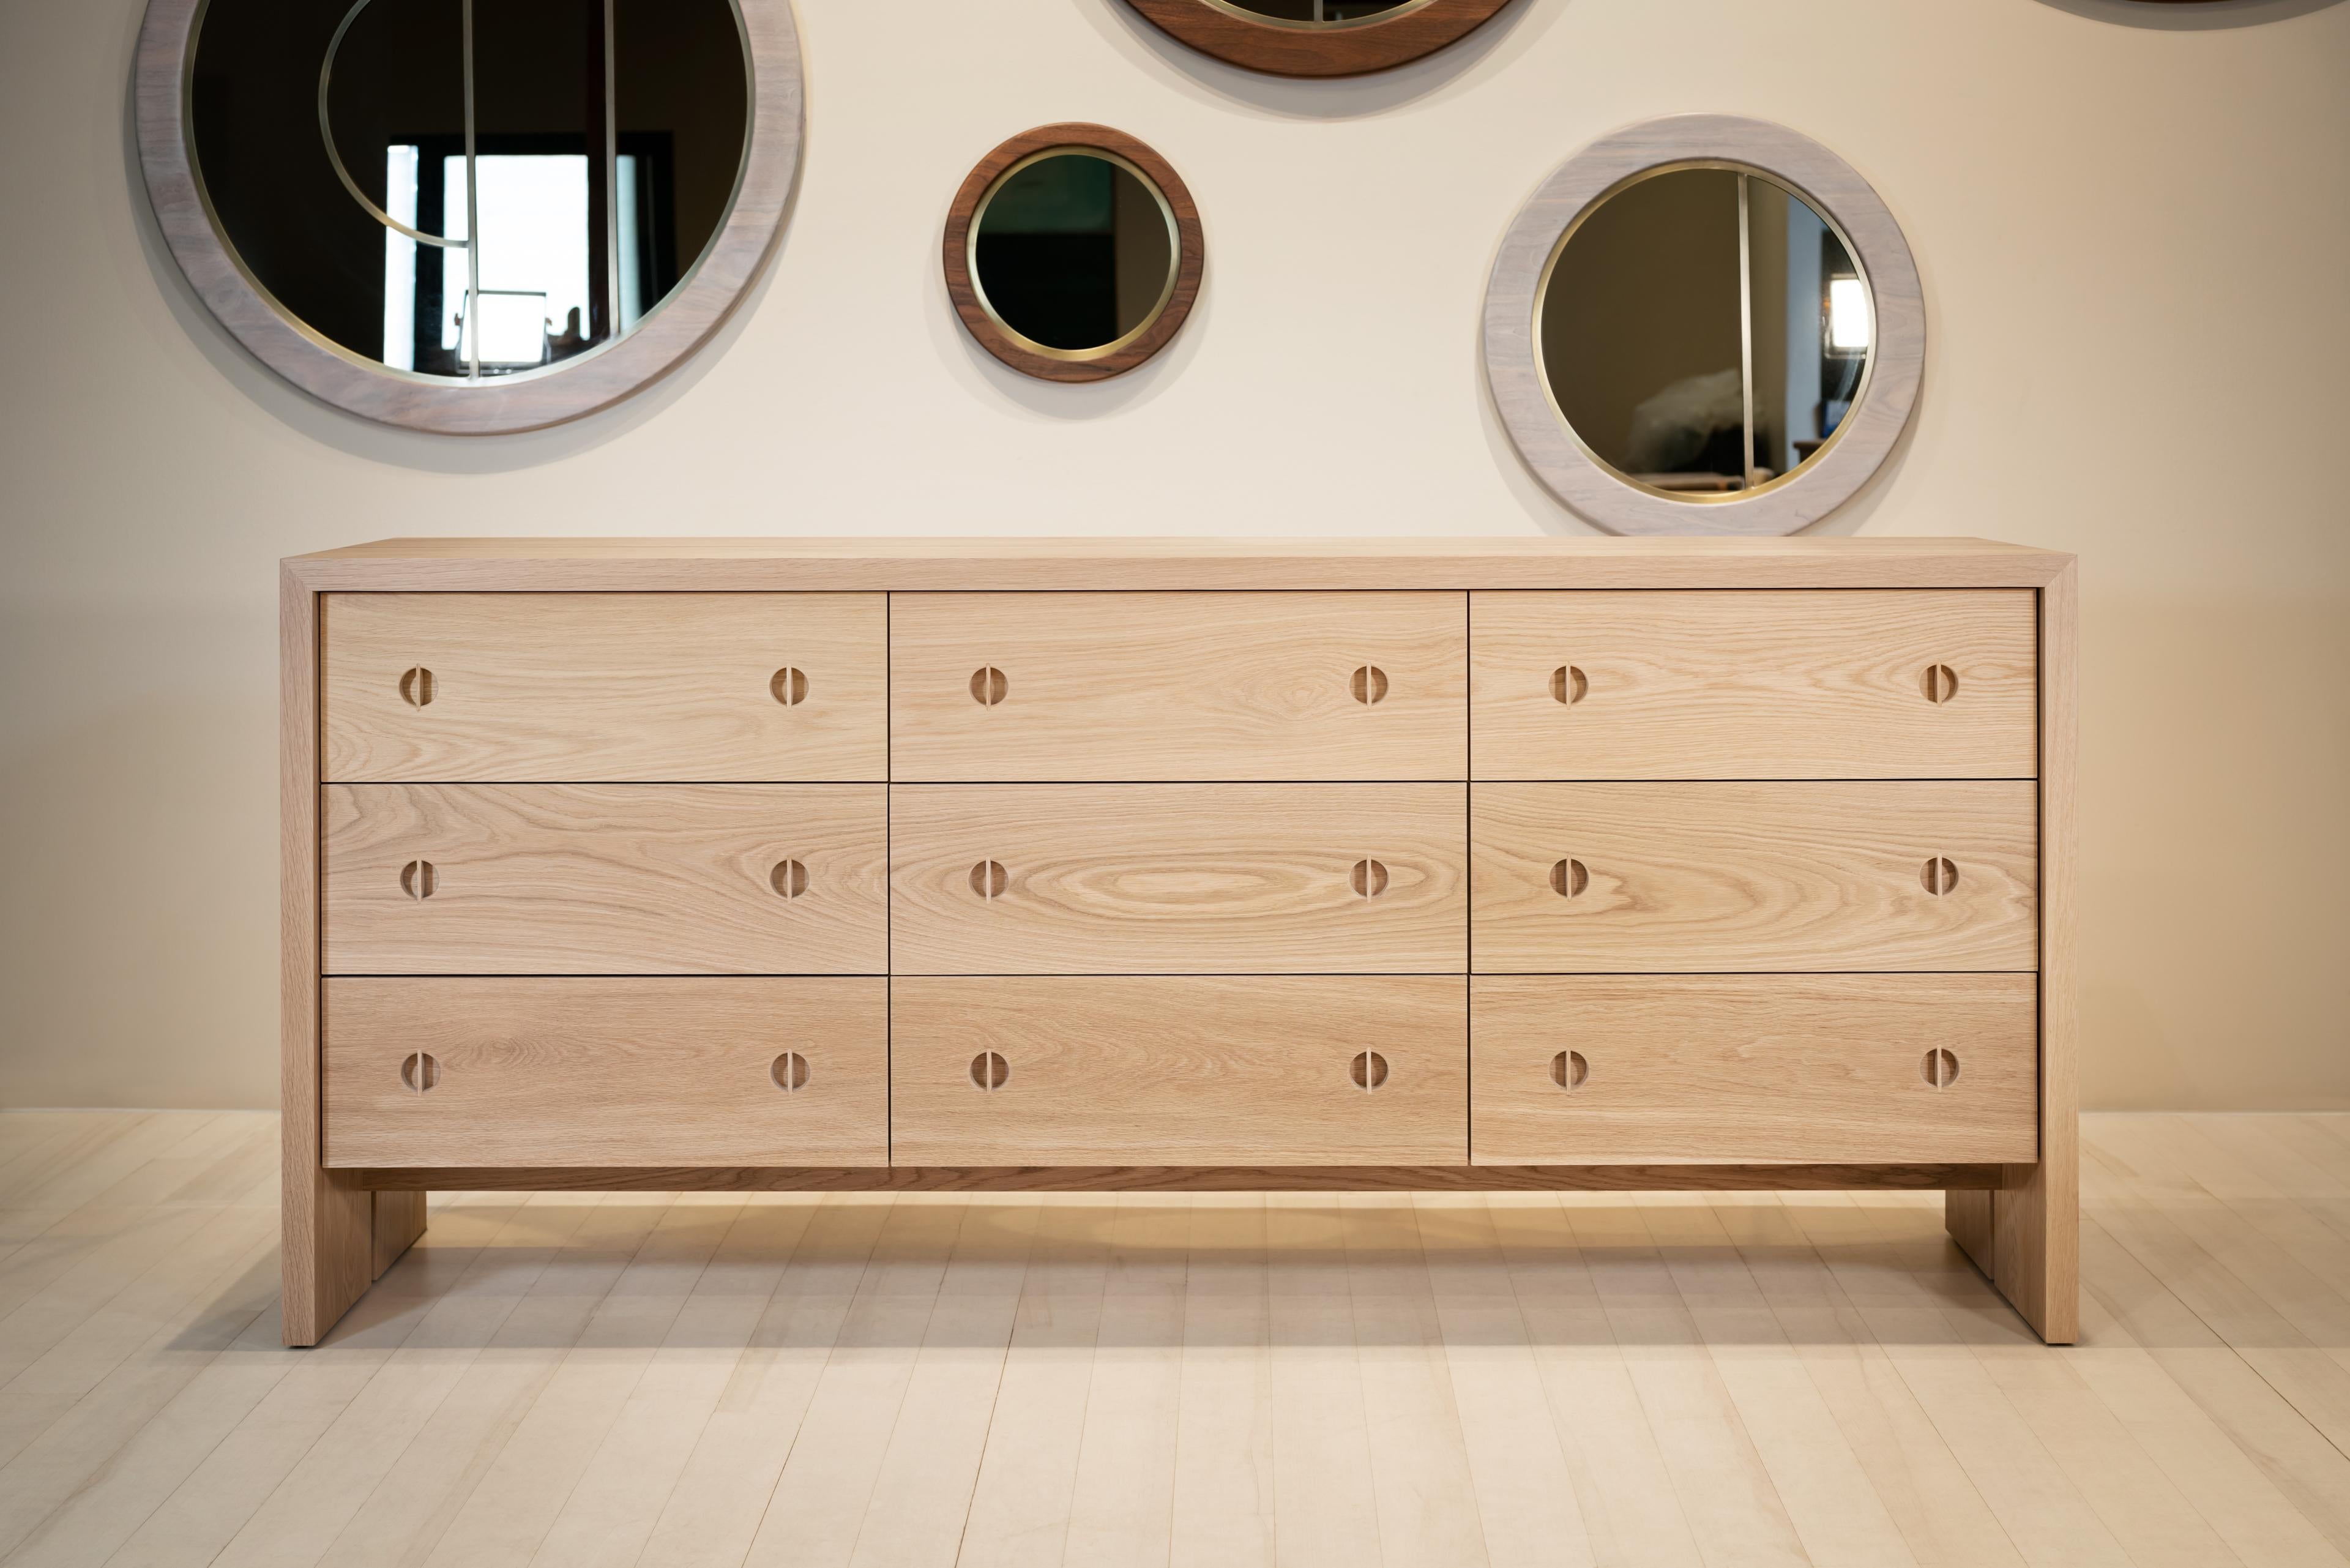 This modern wood dresser is hand-made in the United States with all hardwood construction. Characterized by its solid white oak body, minimalist walnut inlay detail, and unique split leg detail this contemporary wood dresser has deep storage drawers